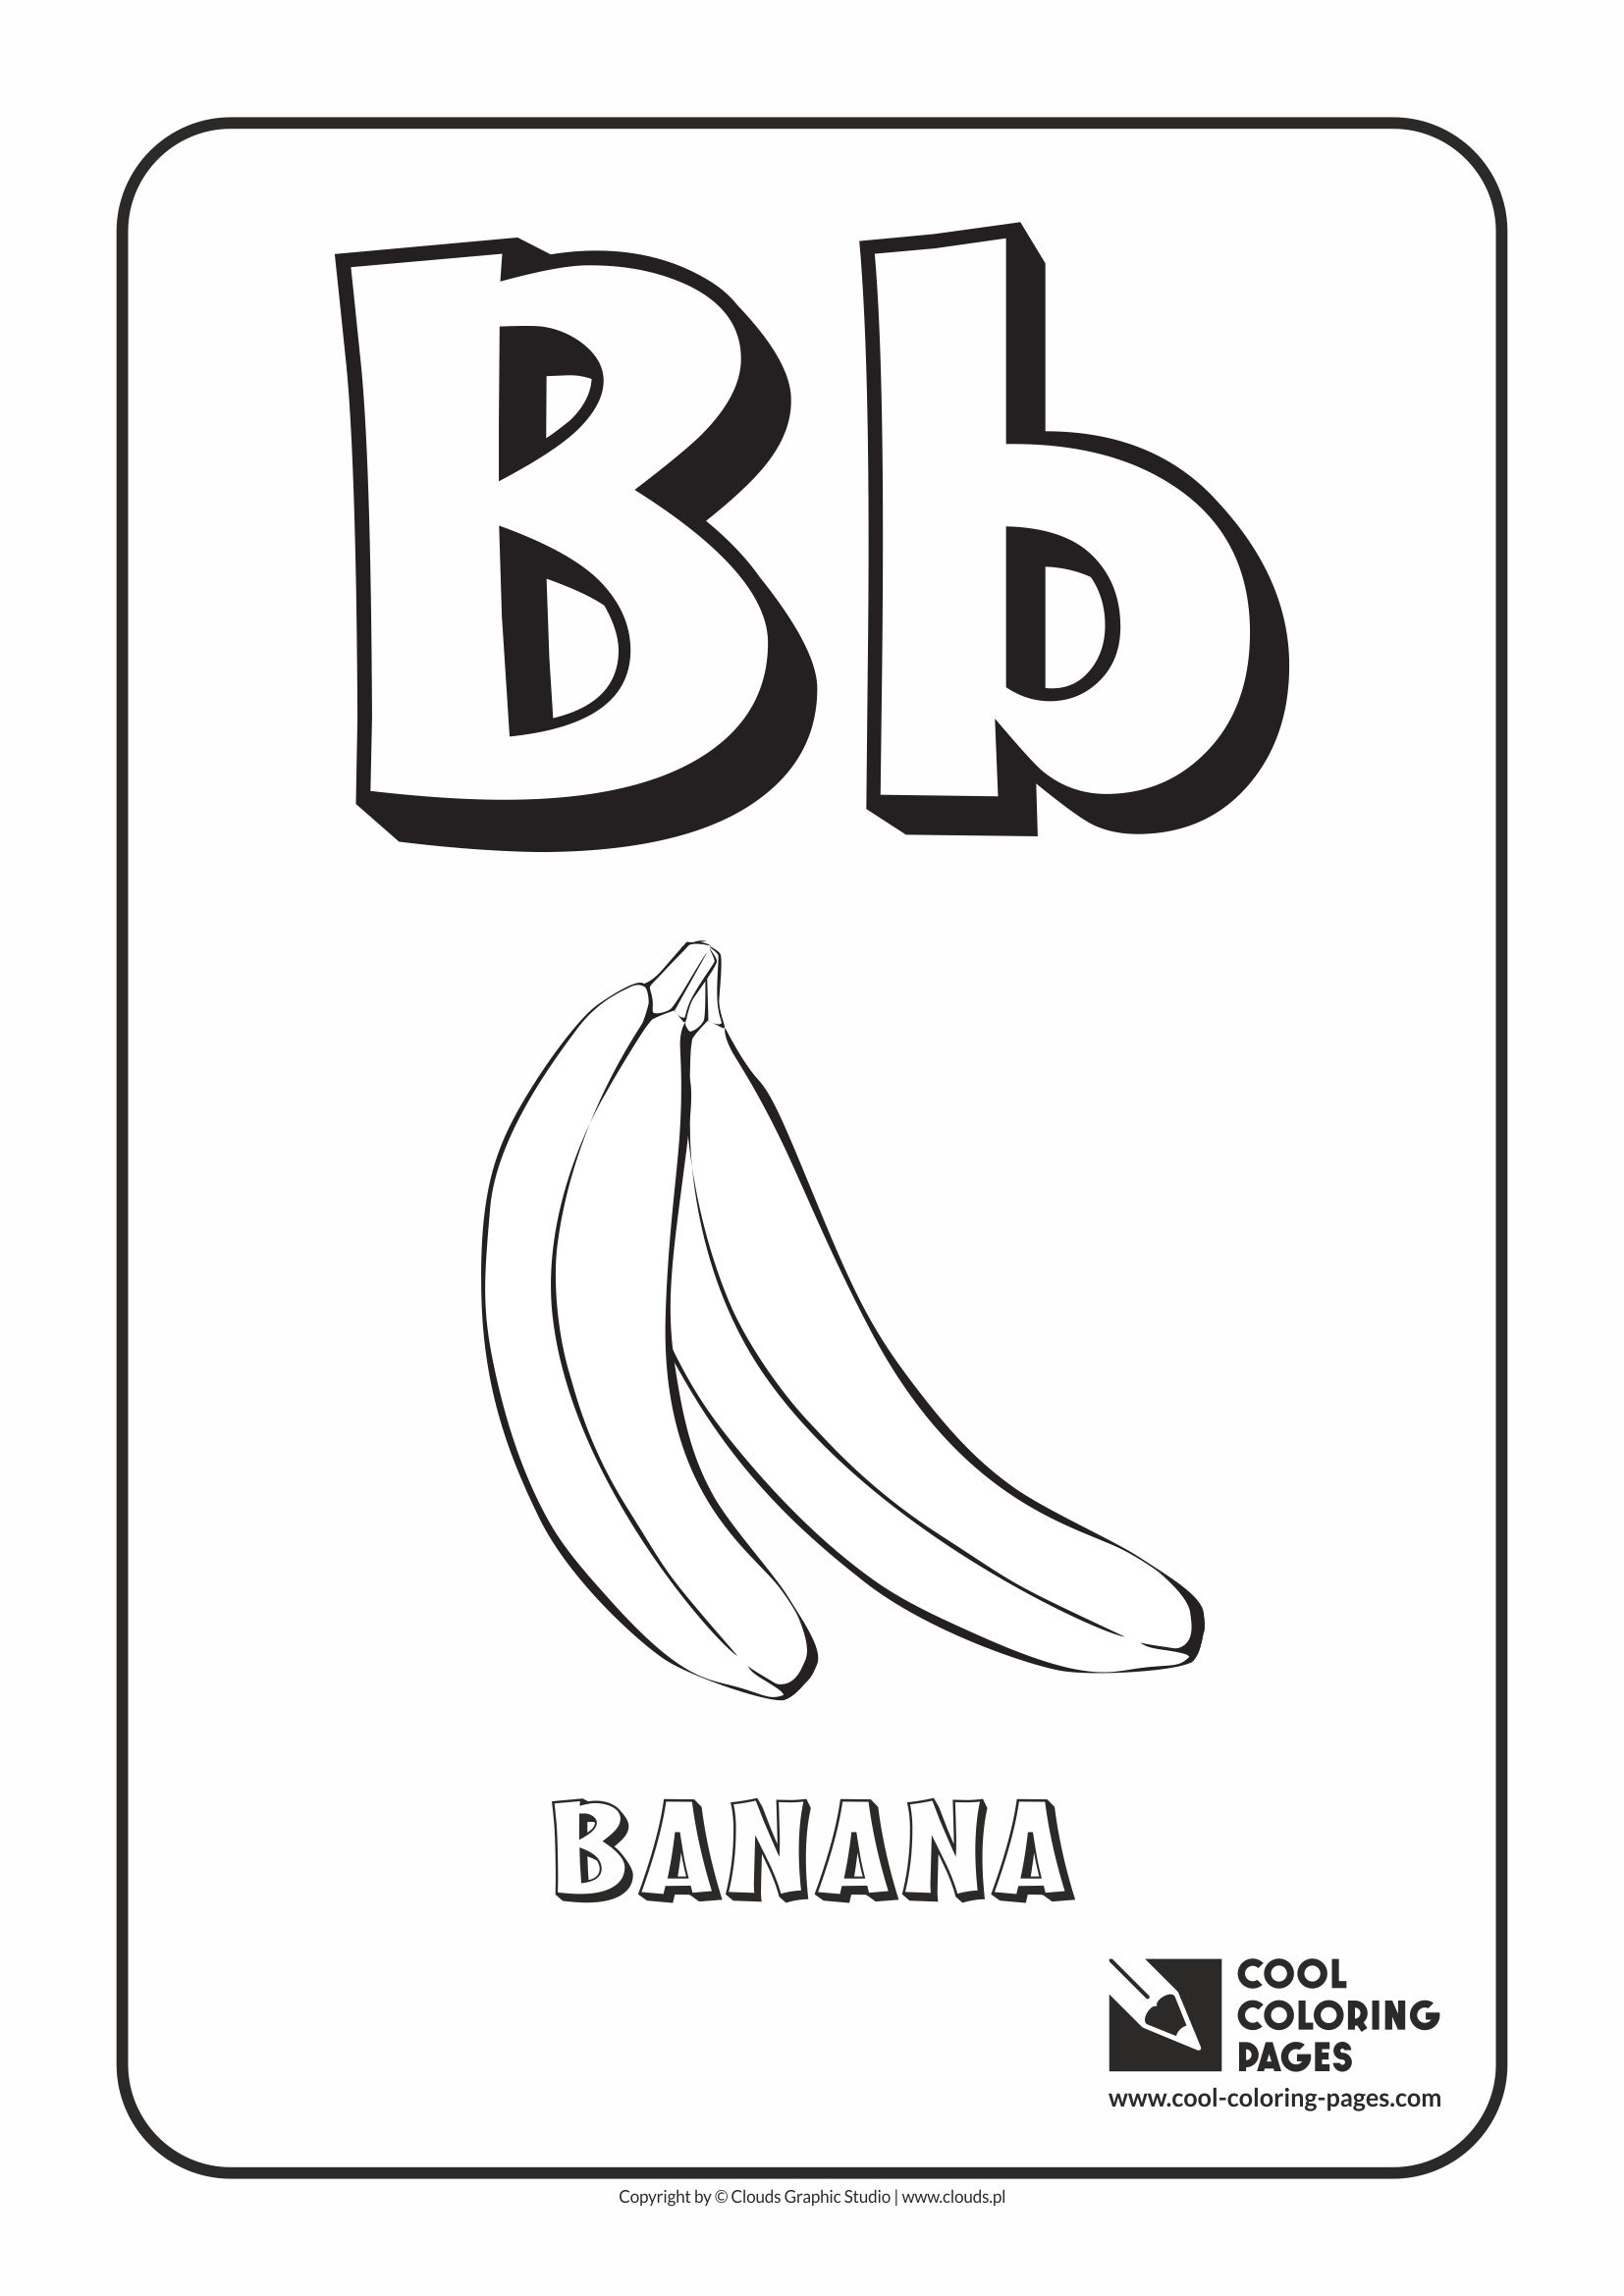 Cool Coloring Pages - Alphabet / Letter B / Coloring page with letter B